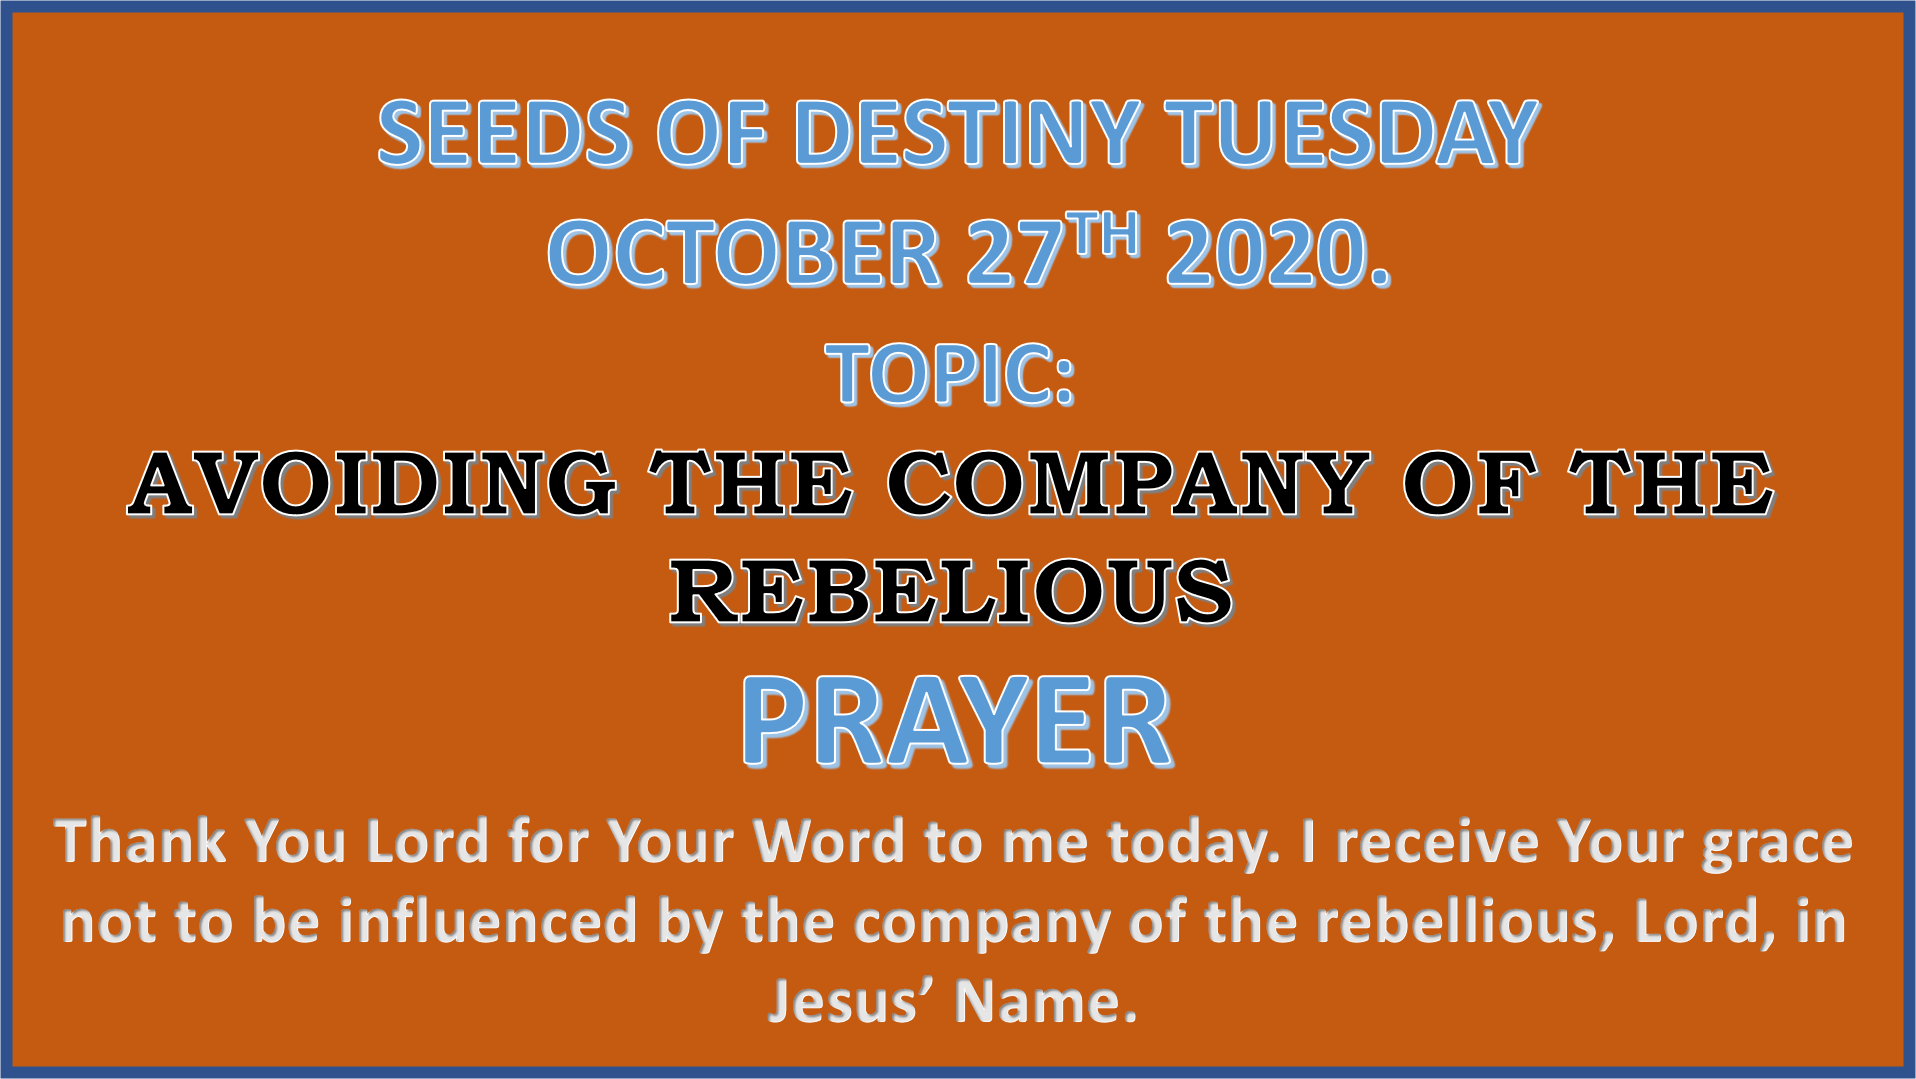 Seeds of Destiny Tuesday 27th October 2020 by Dr Paul Enenche